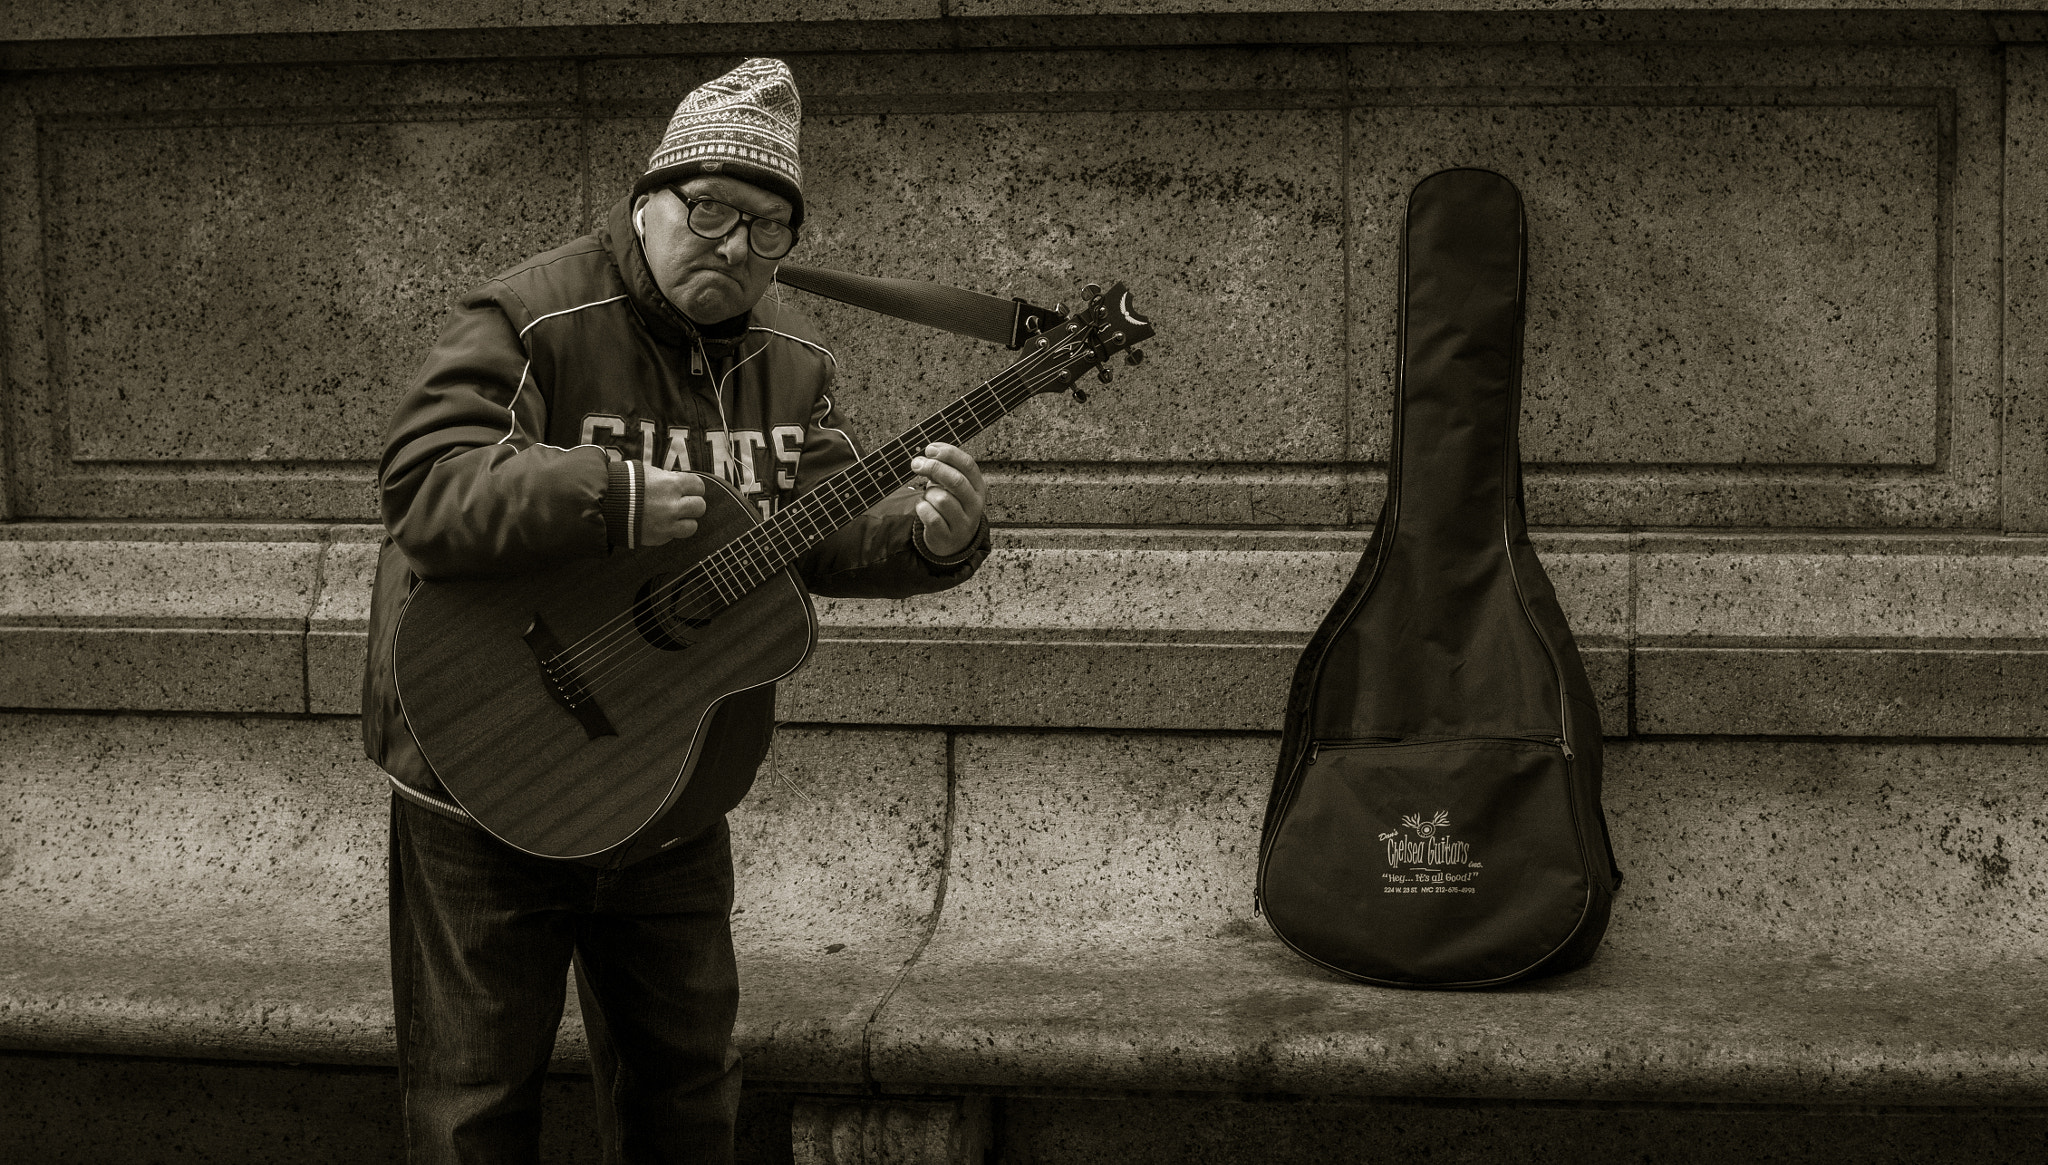 Sony a6000 sample photo. Man playing a guitar photography